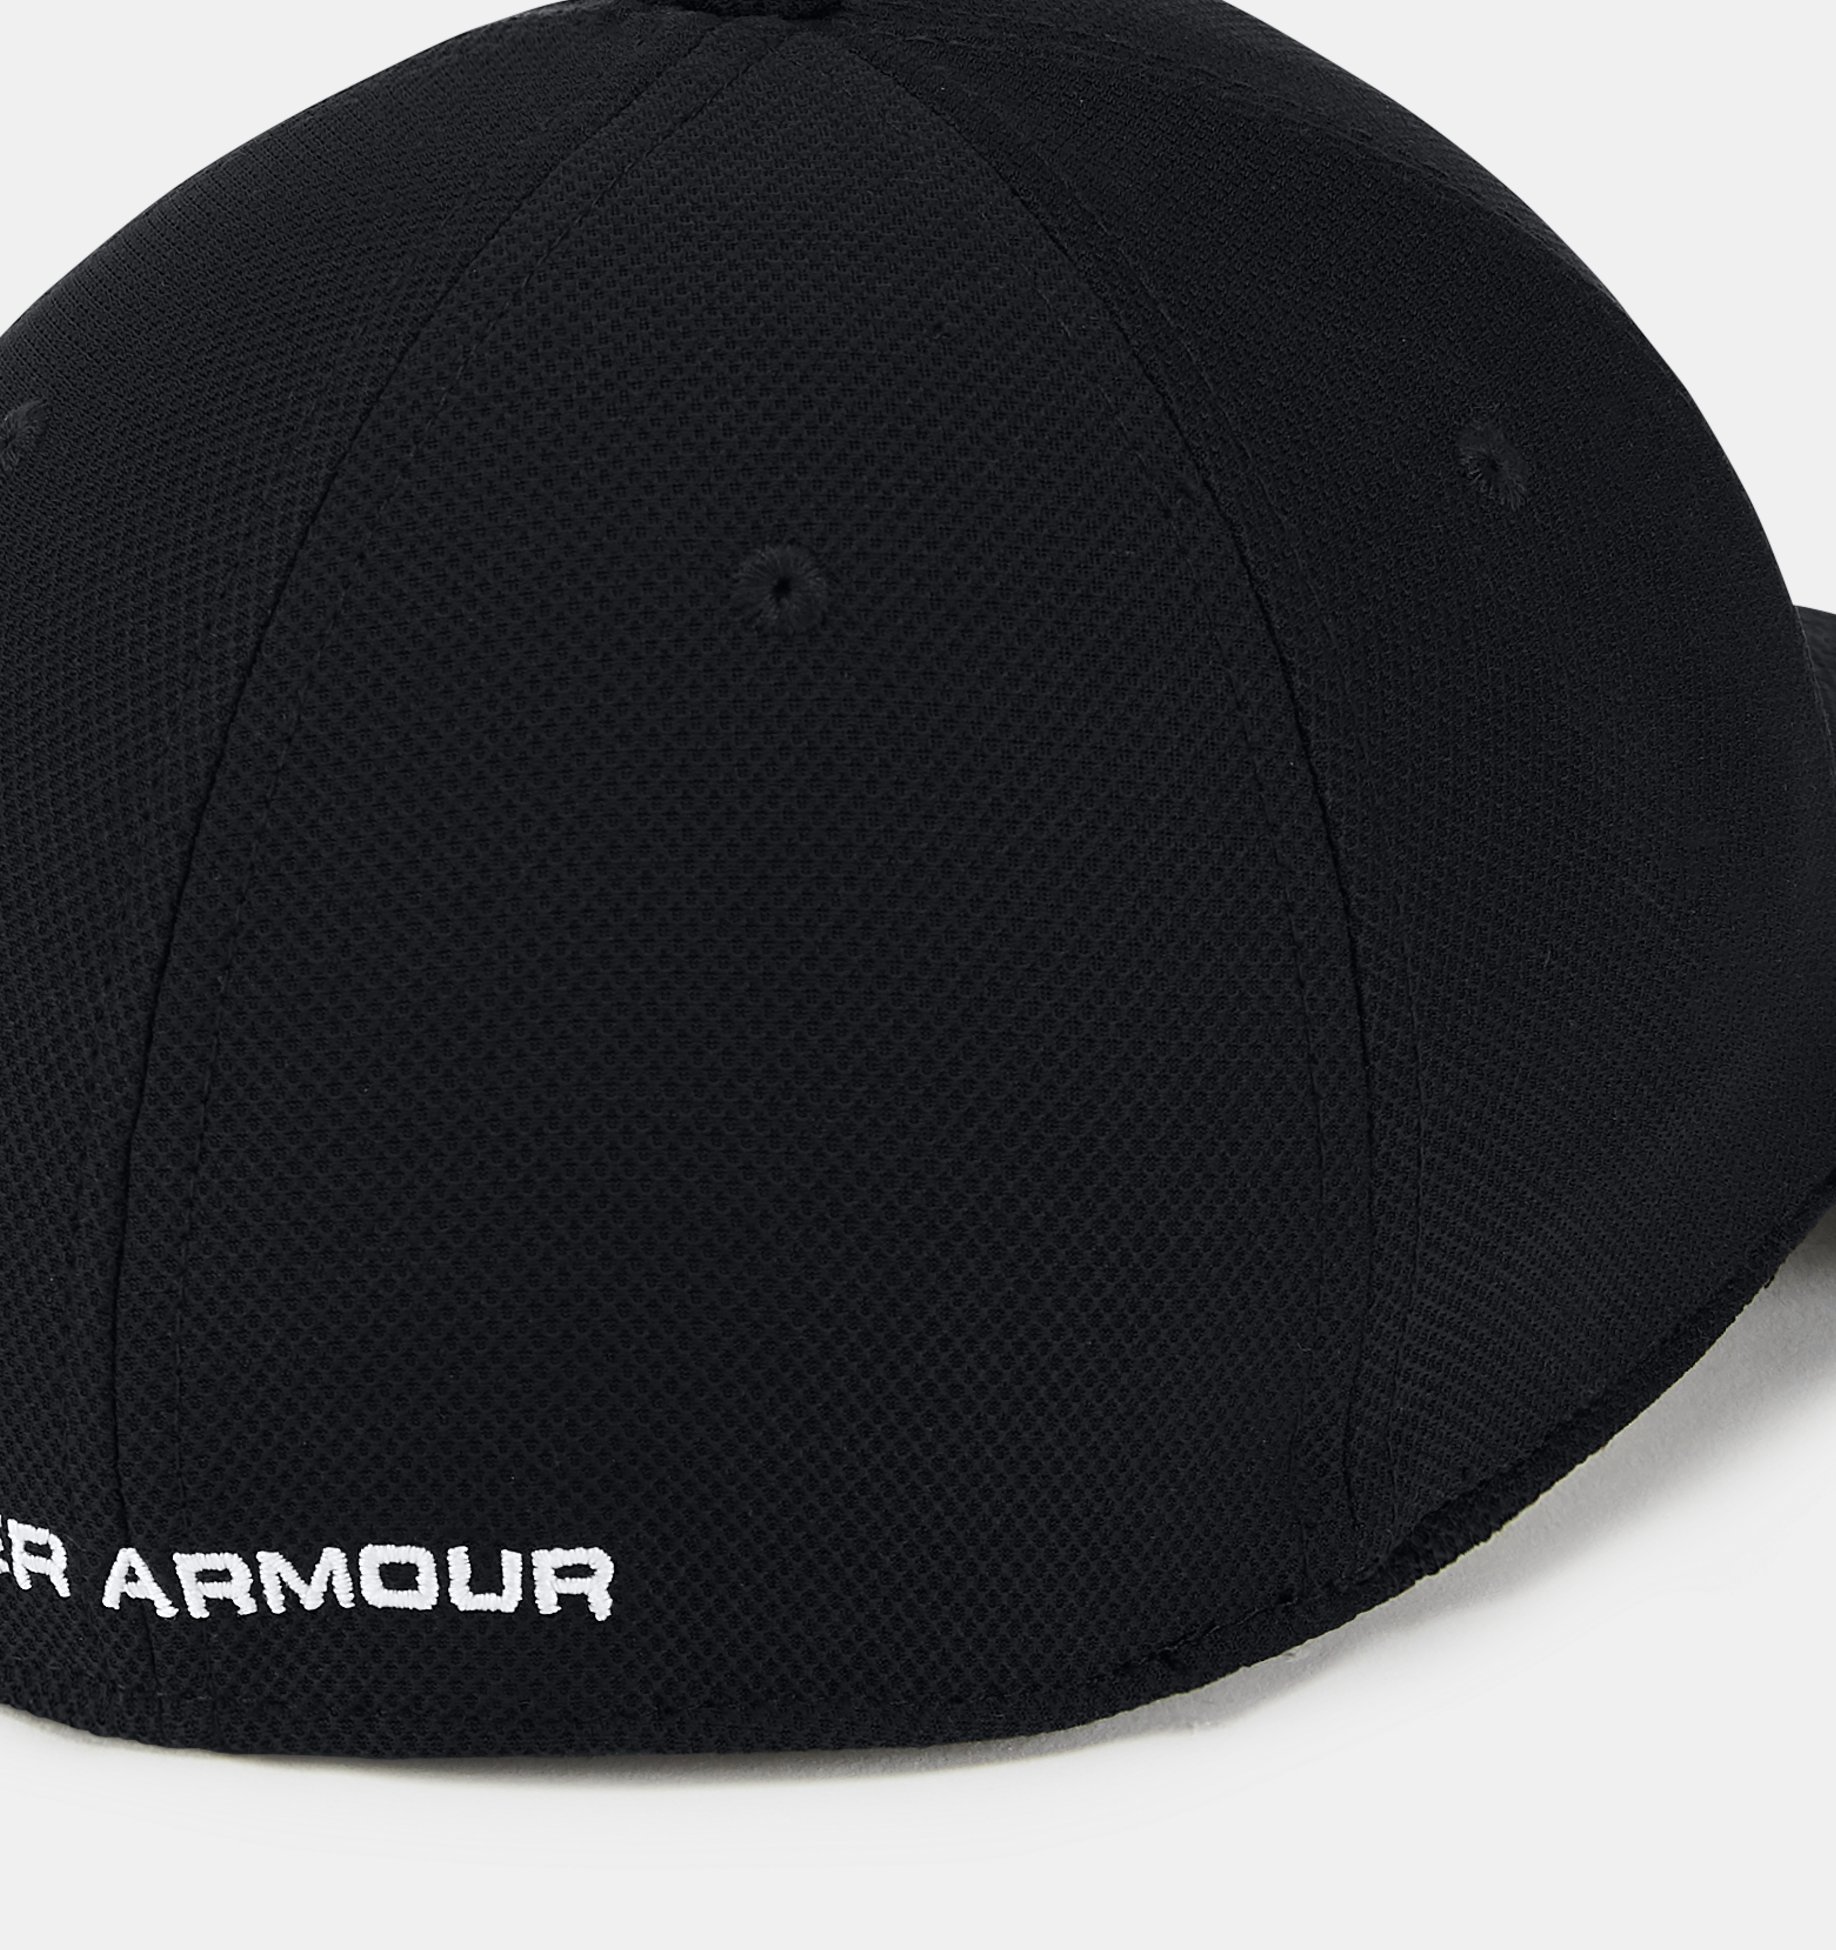 https://underarmour.scene7.com/is/image/Underarmour/1305036-001_SLB_SL?rp=standard-0pad|pdpZoomDesktop&scl=0.85&fmt=jpg&qlt=85&resMode=sharp2&cache=on,on&bgc=f0f0f0&wid=1836&hei=1950&size=1500,1500